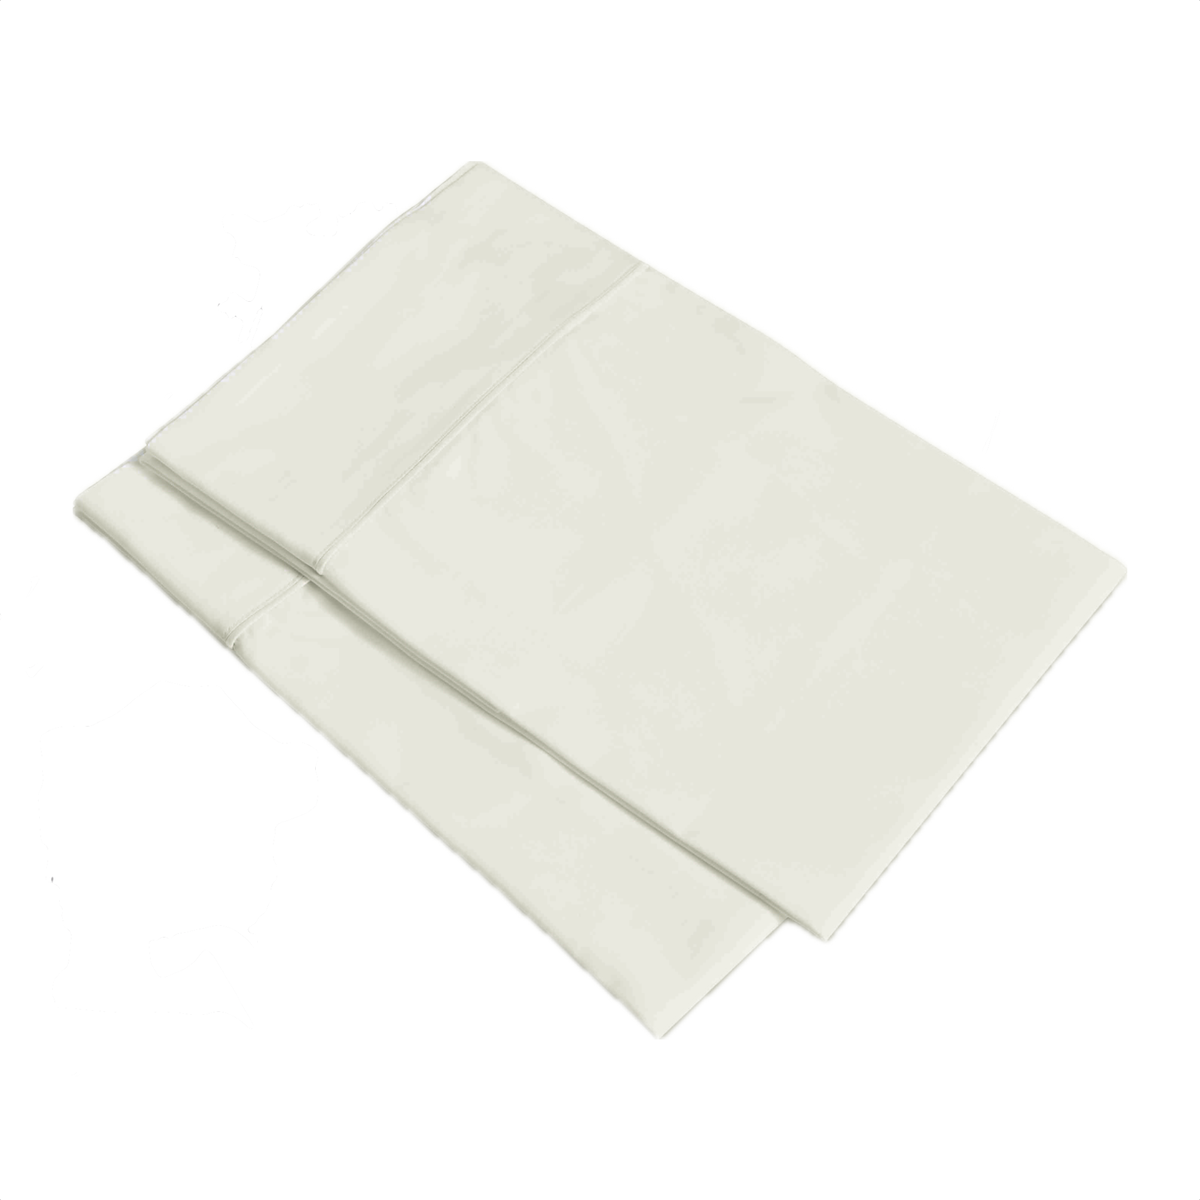 Folded Silos of Signoria Luce Bedding Pillowcases in Ivory Color